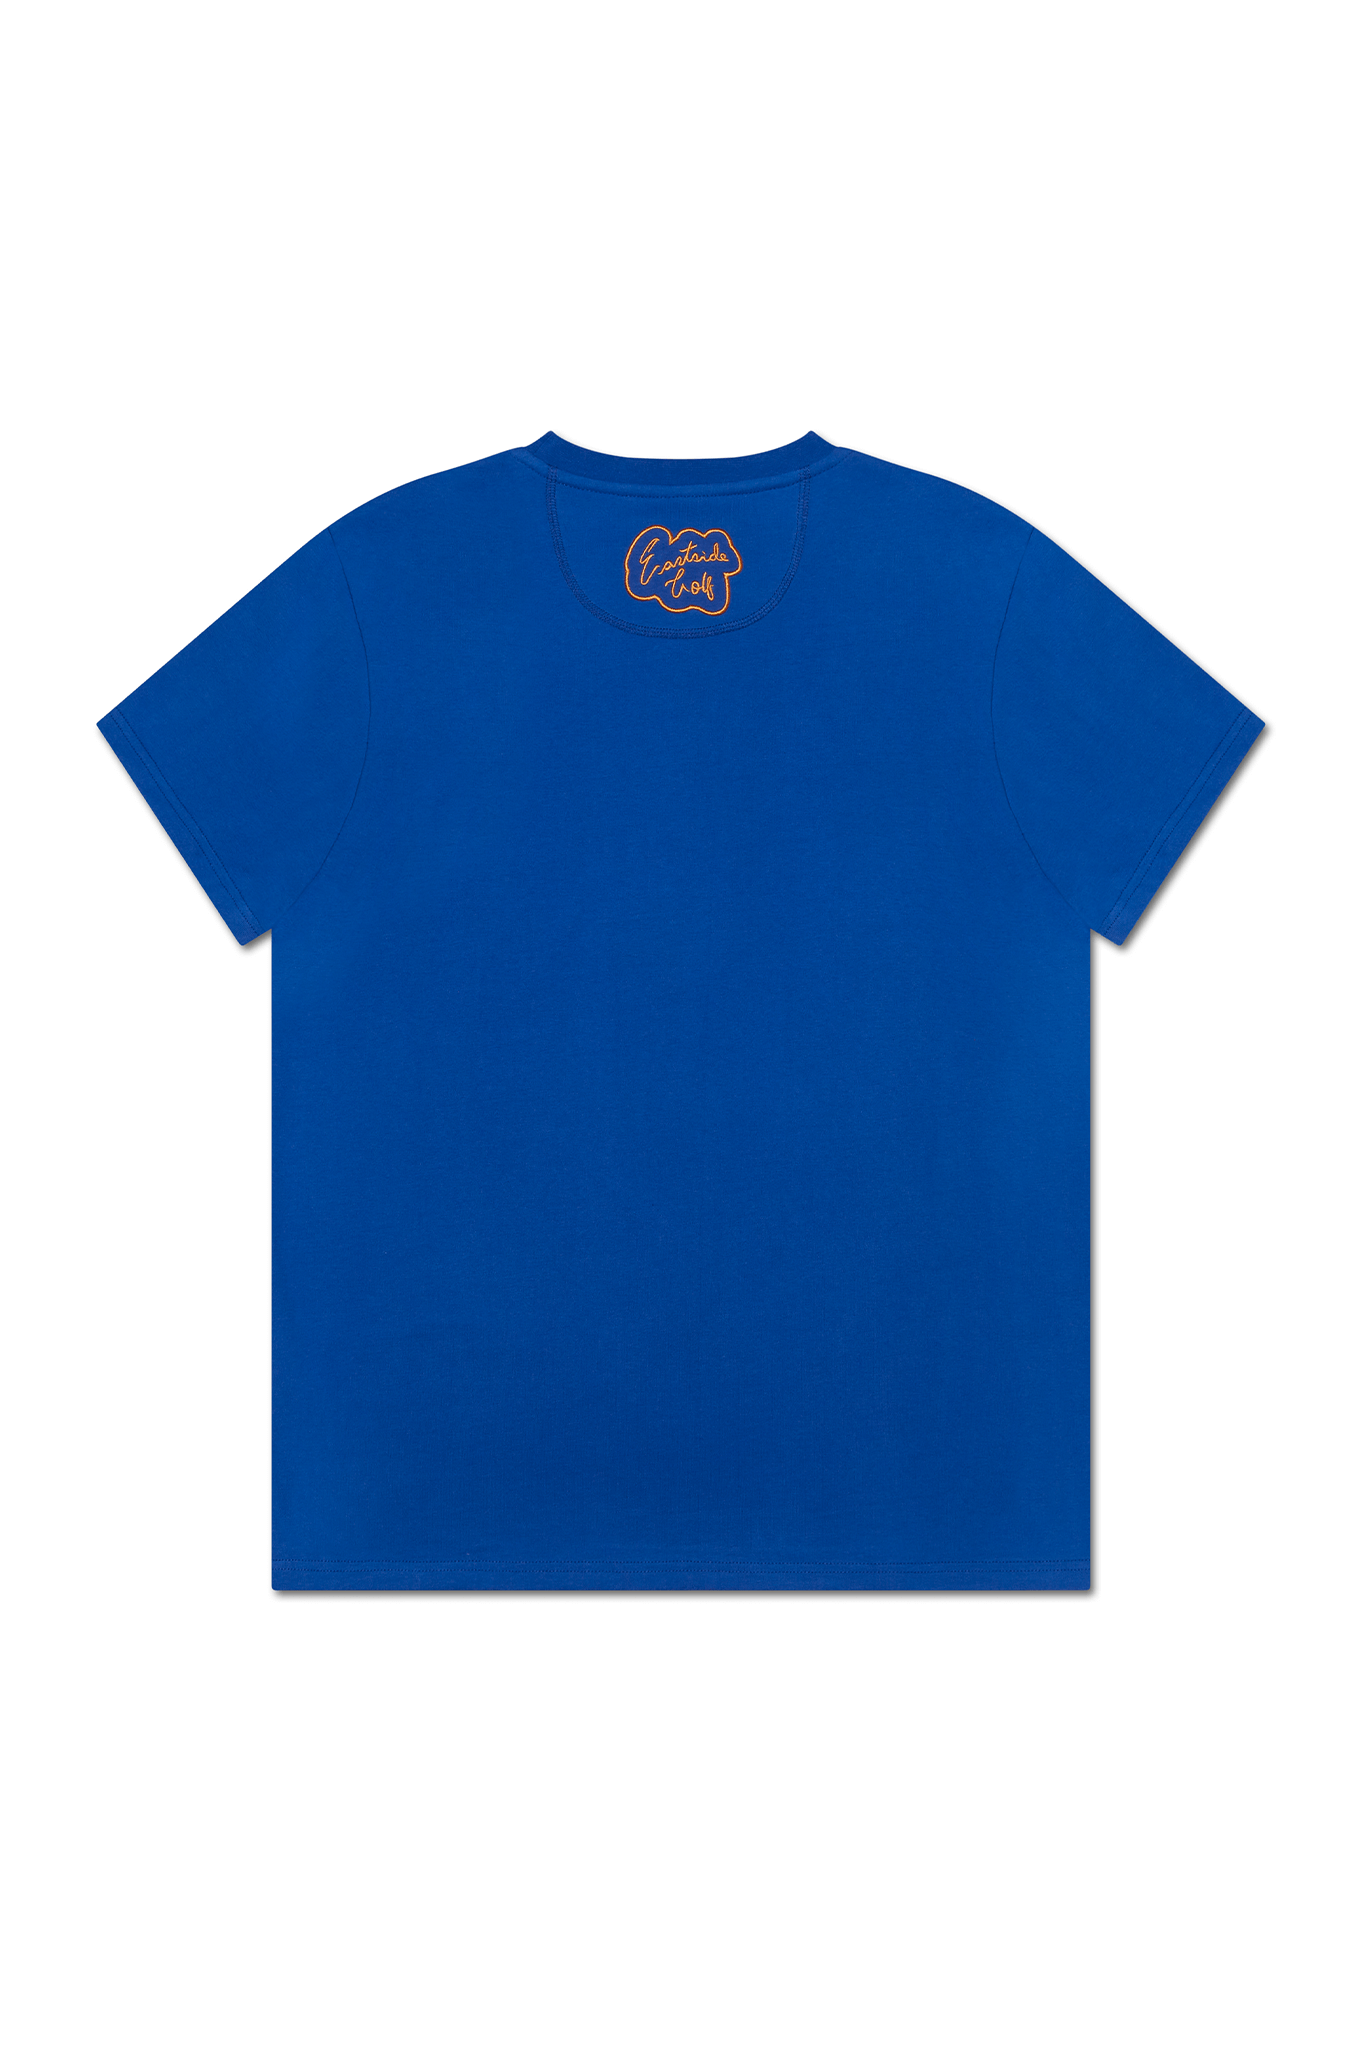 Eastside NBA-Playing Golf After This Knicks T-Shirt Blue